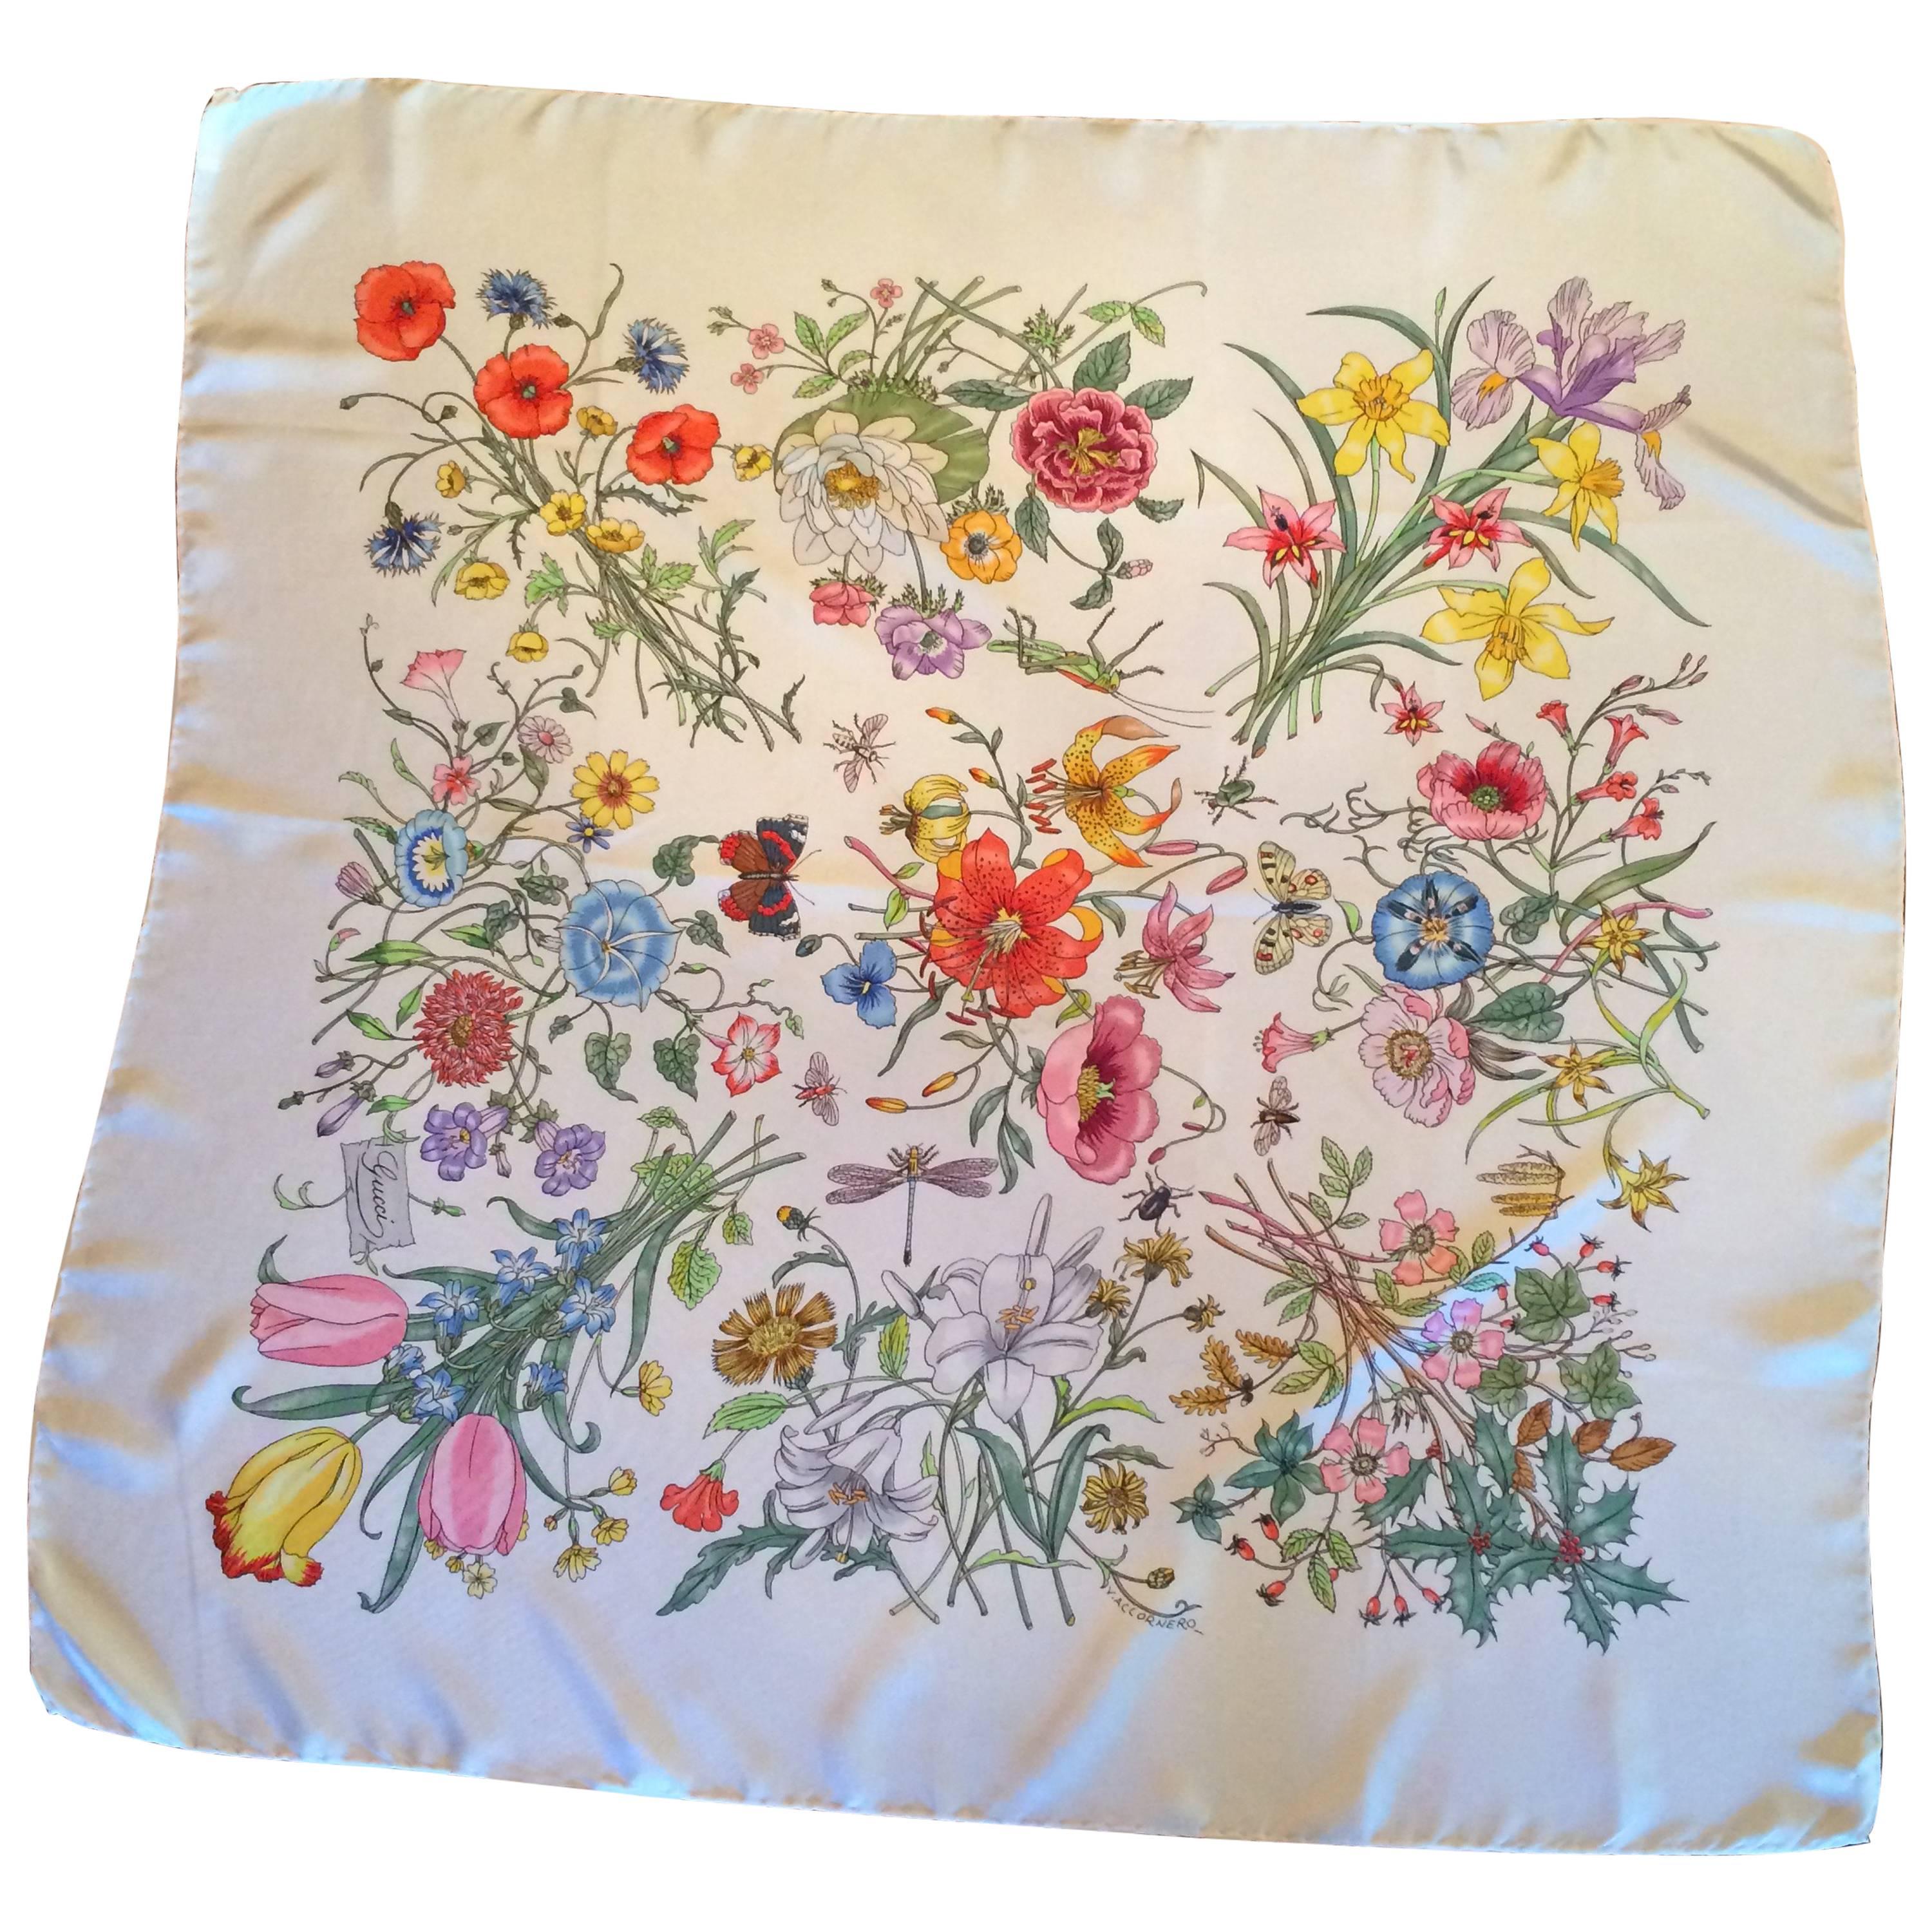 Gucci Silk Scarf with floral pattern.  This pattern has been re-issued and is in the most current Gucci Collection